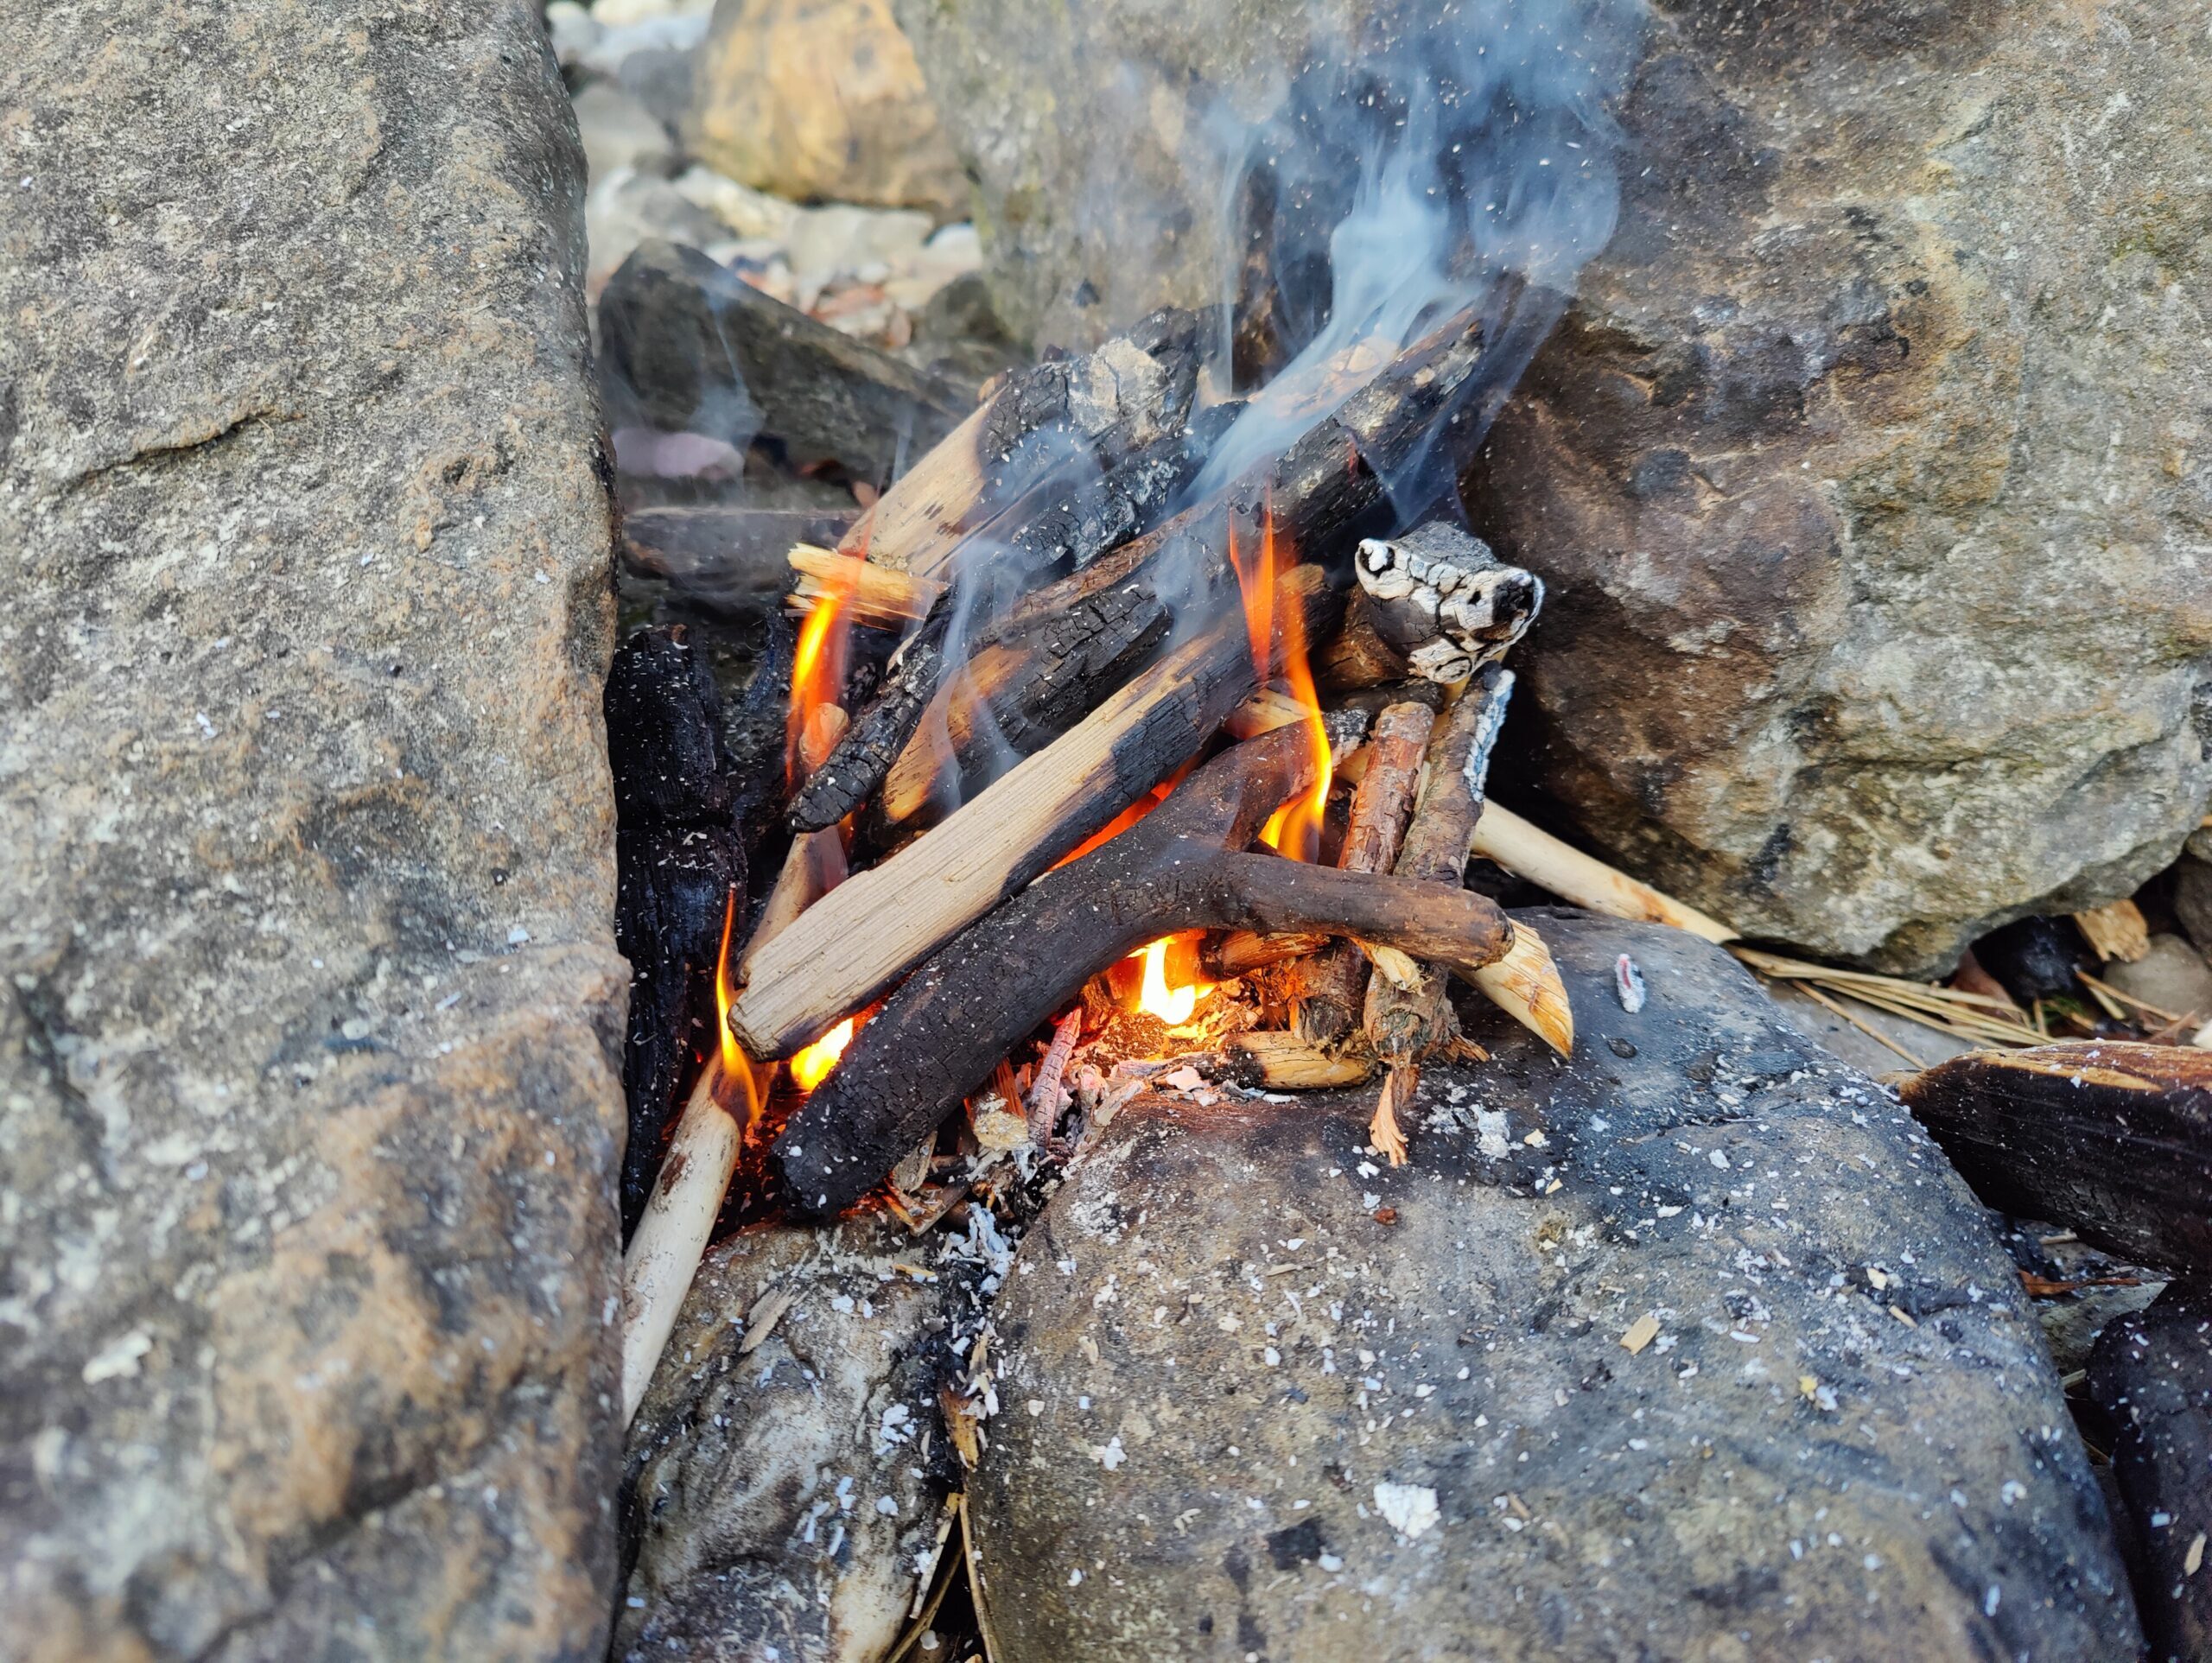 A small fire between two rocks